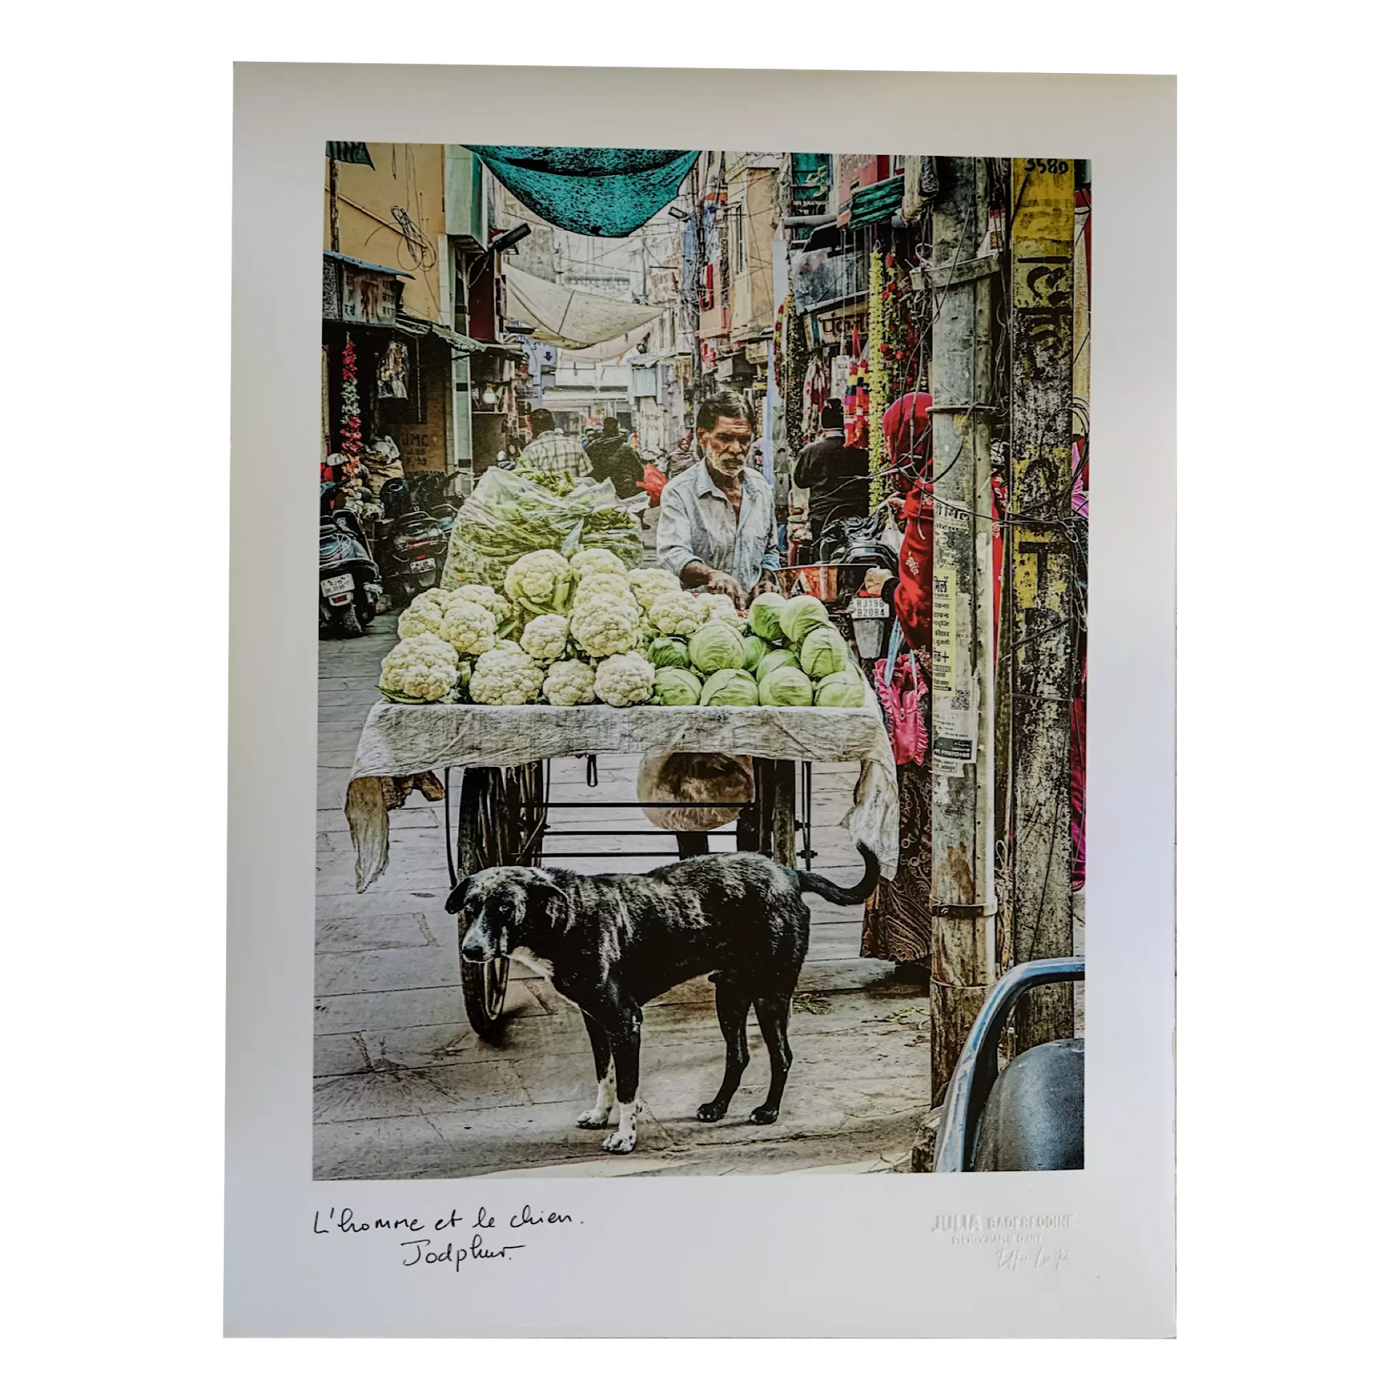 The cabbage seller and the dog, Jodhpur - Poster